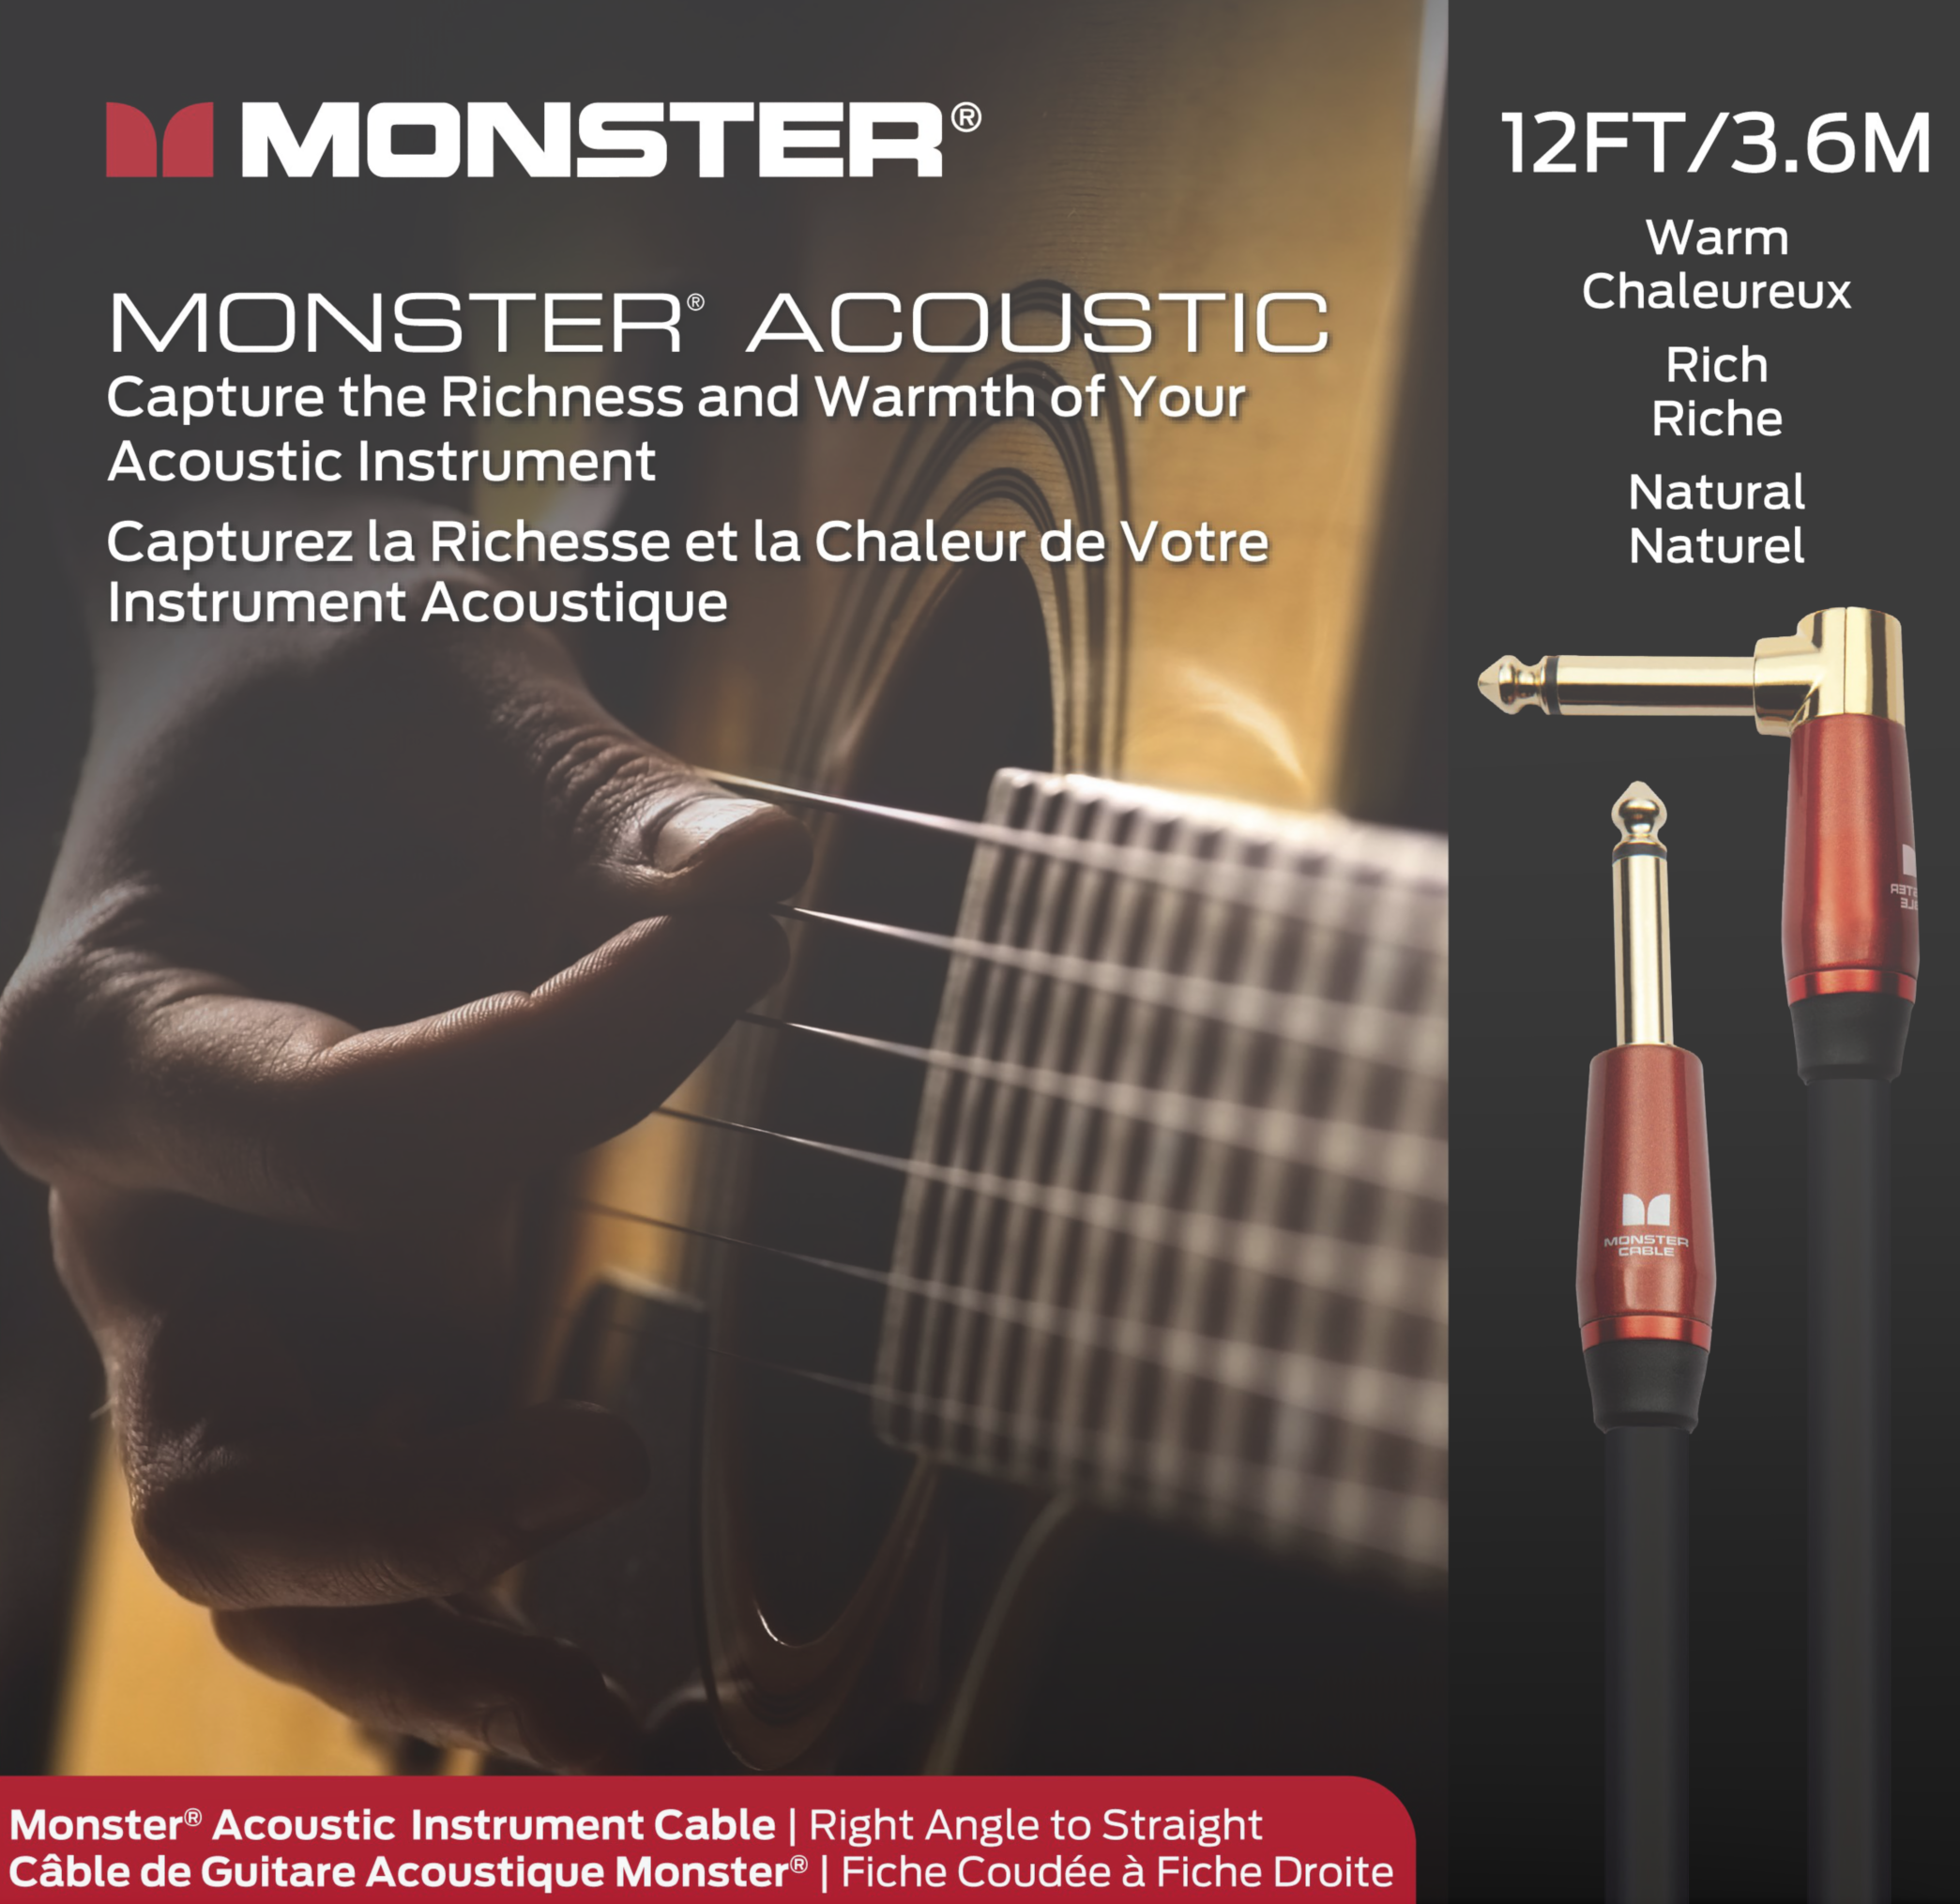 Monster® Prolink Acoustic Instrument Cable - HIENDGUITAR 12ft(3.6m) / Straight-Angle 12ft(3.6m) Monstercable Cable